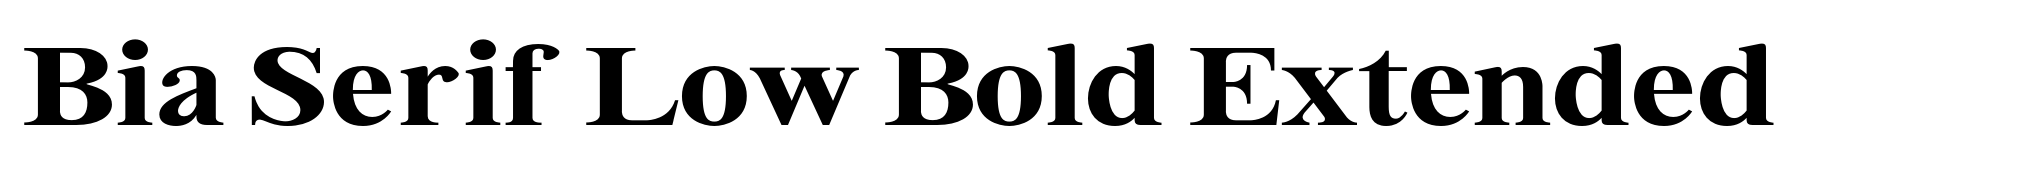 Bia Serif Low Bold Extended image